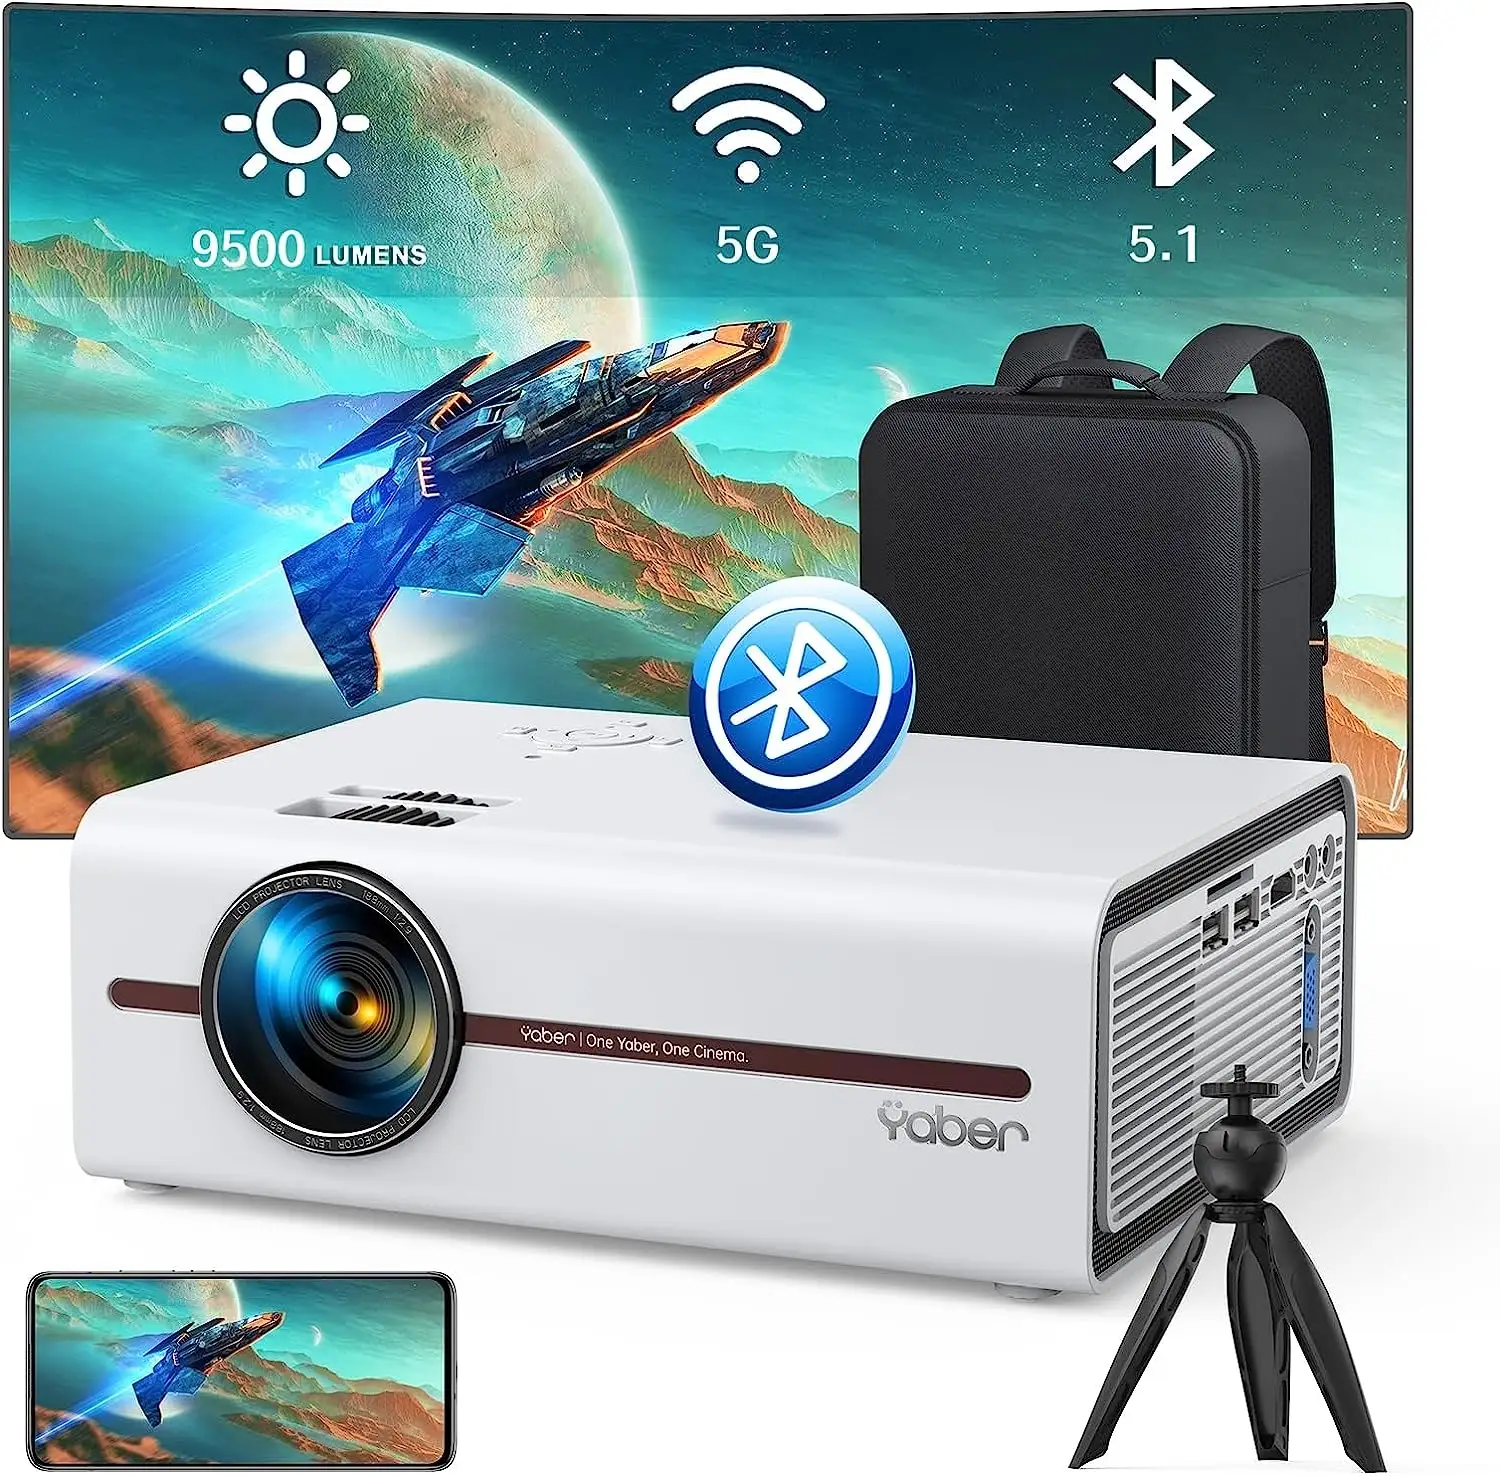 Yaber Mini Projector With 5G WiFi And BT 5.1 1080P Resolution And 4K Supported Compatible With HD-MI V5 Best Seller On Amz